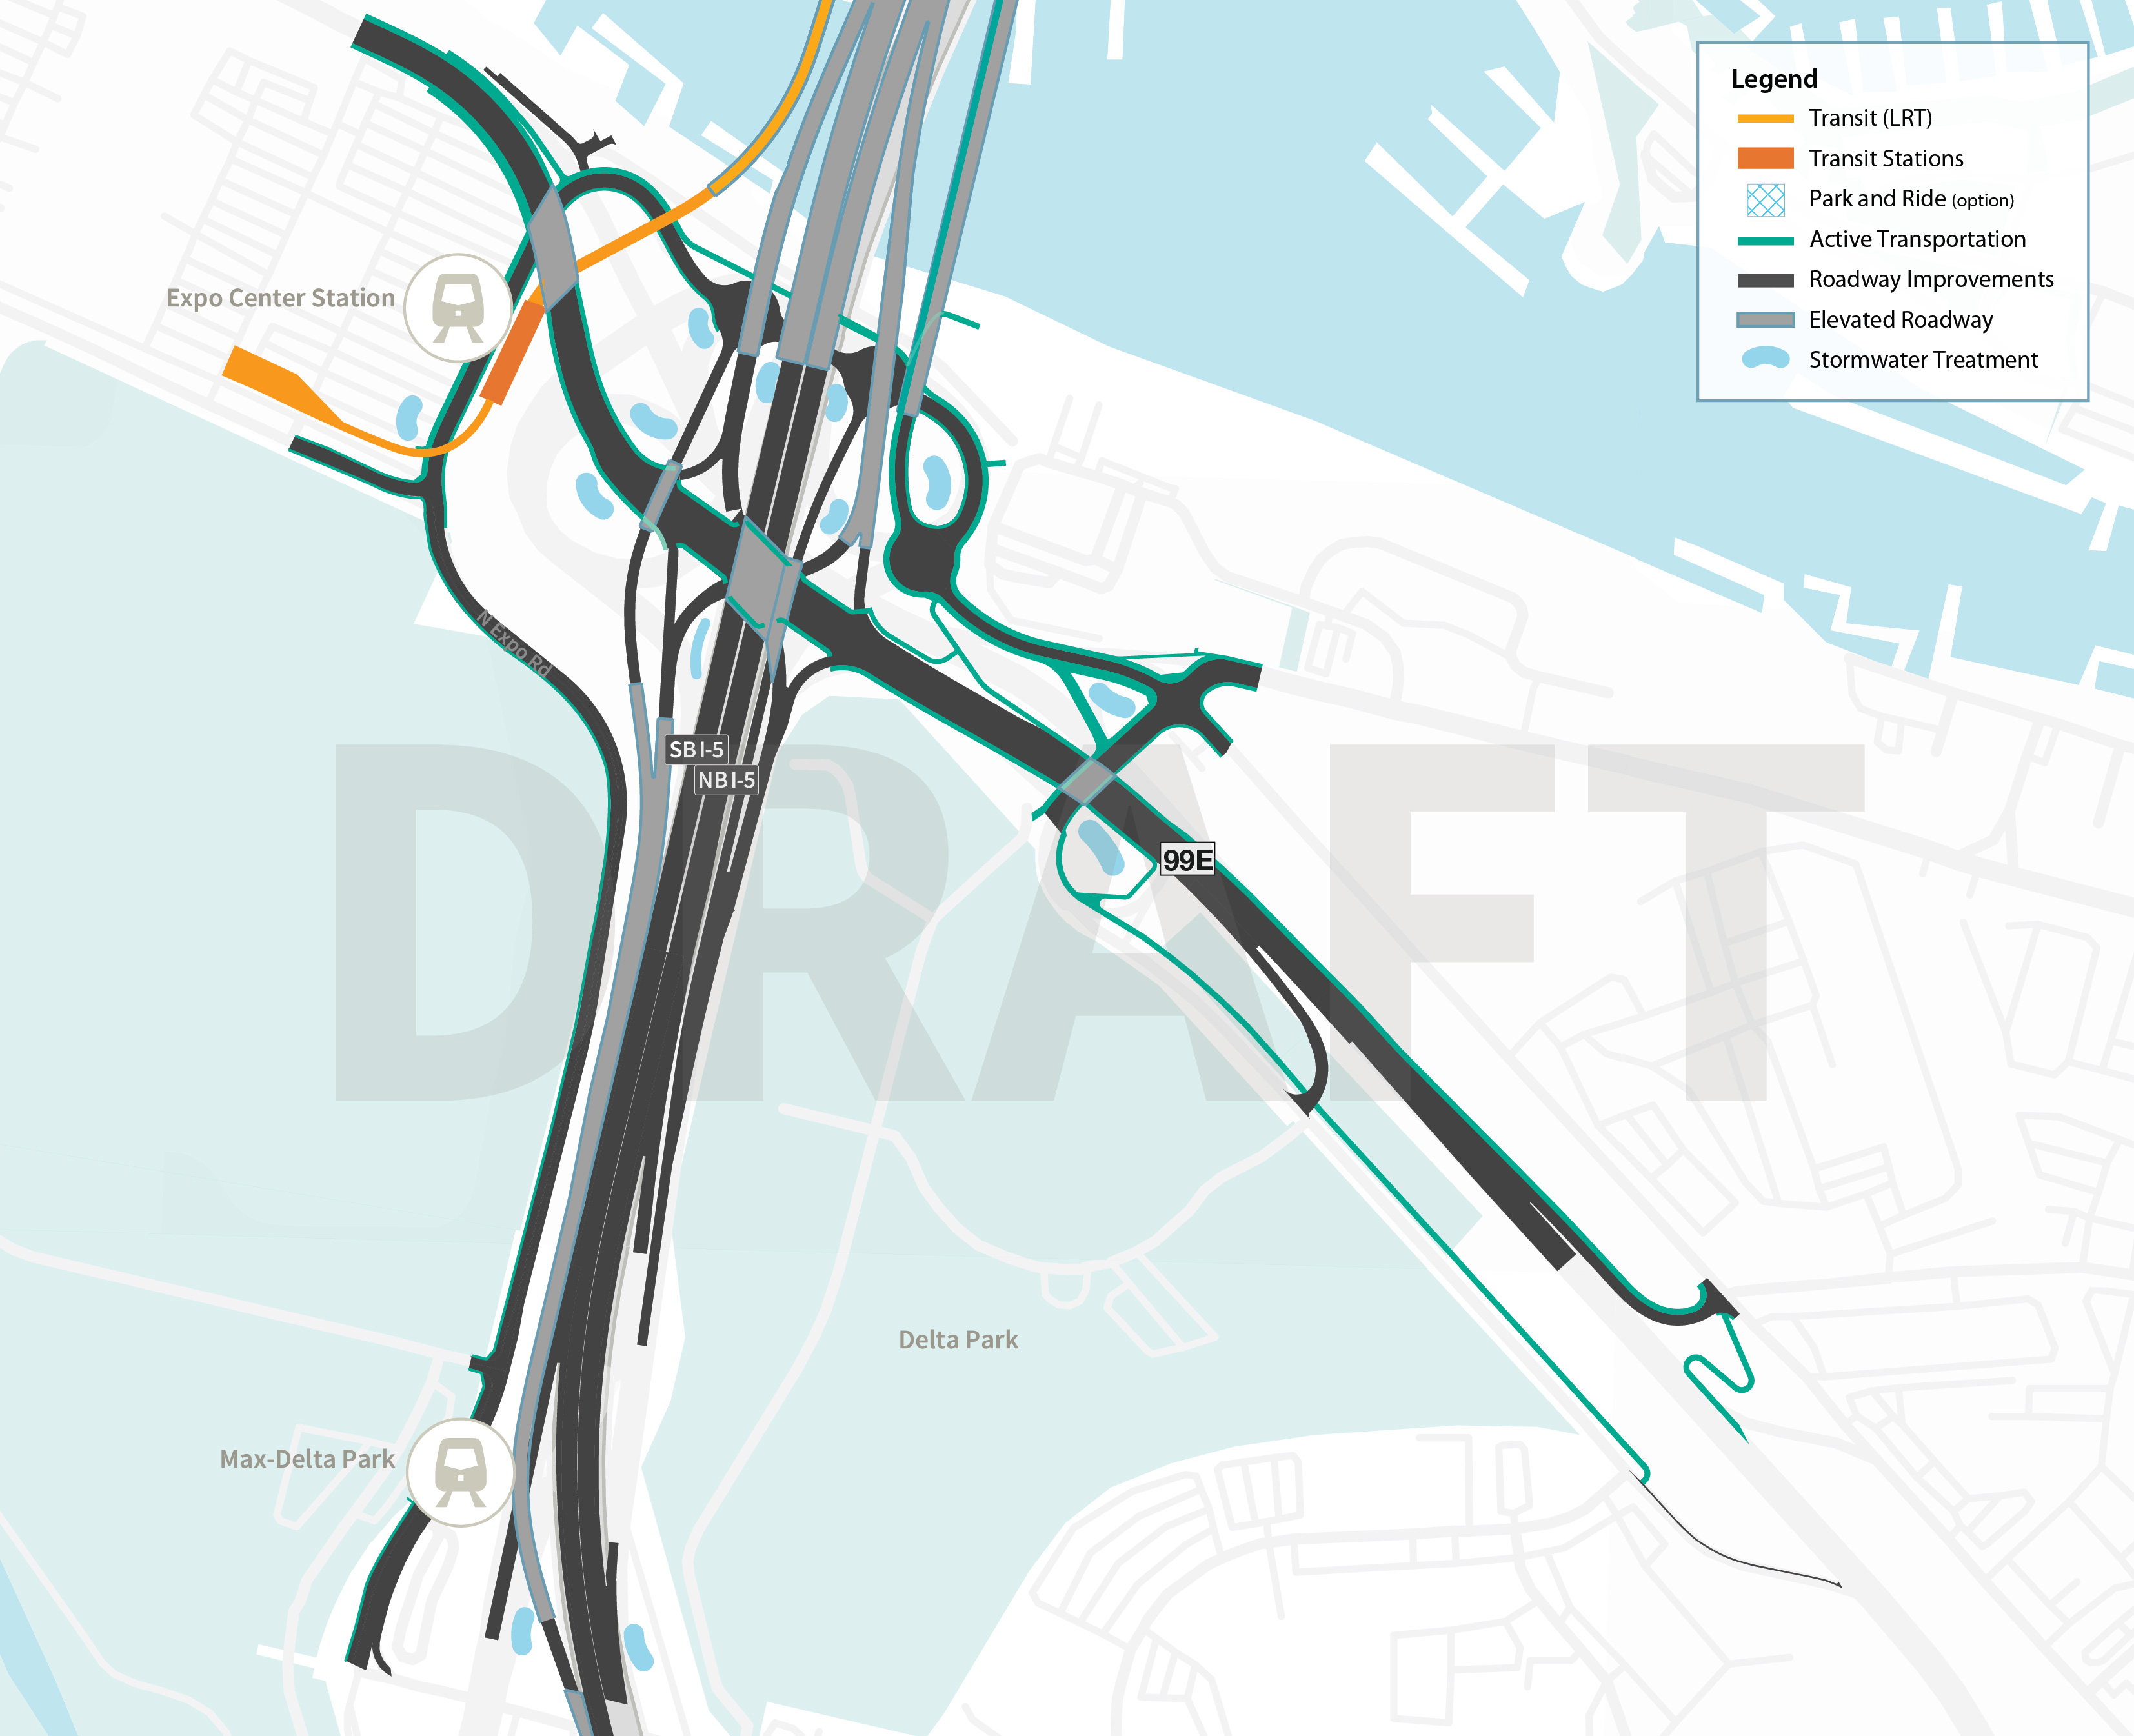 The map image shows a section of North Portland from Delta Park to N. Portland Harbor. The interchange configuration is a full interchange with on and off ramps for NB and SB 1-5. Improvements to I-5 extend Delta Park, MLK, and Marine Drive. There are also local street connections and improvements, shared use path improvements through out the new design, and an expanded Expo Center station.